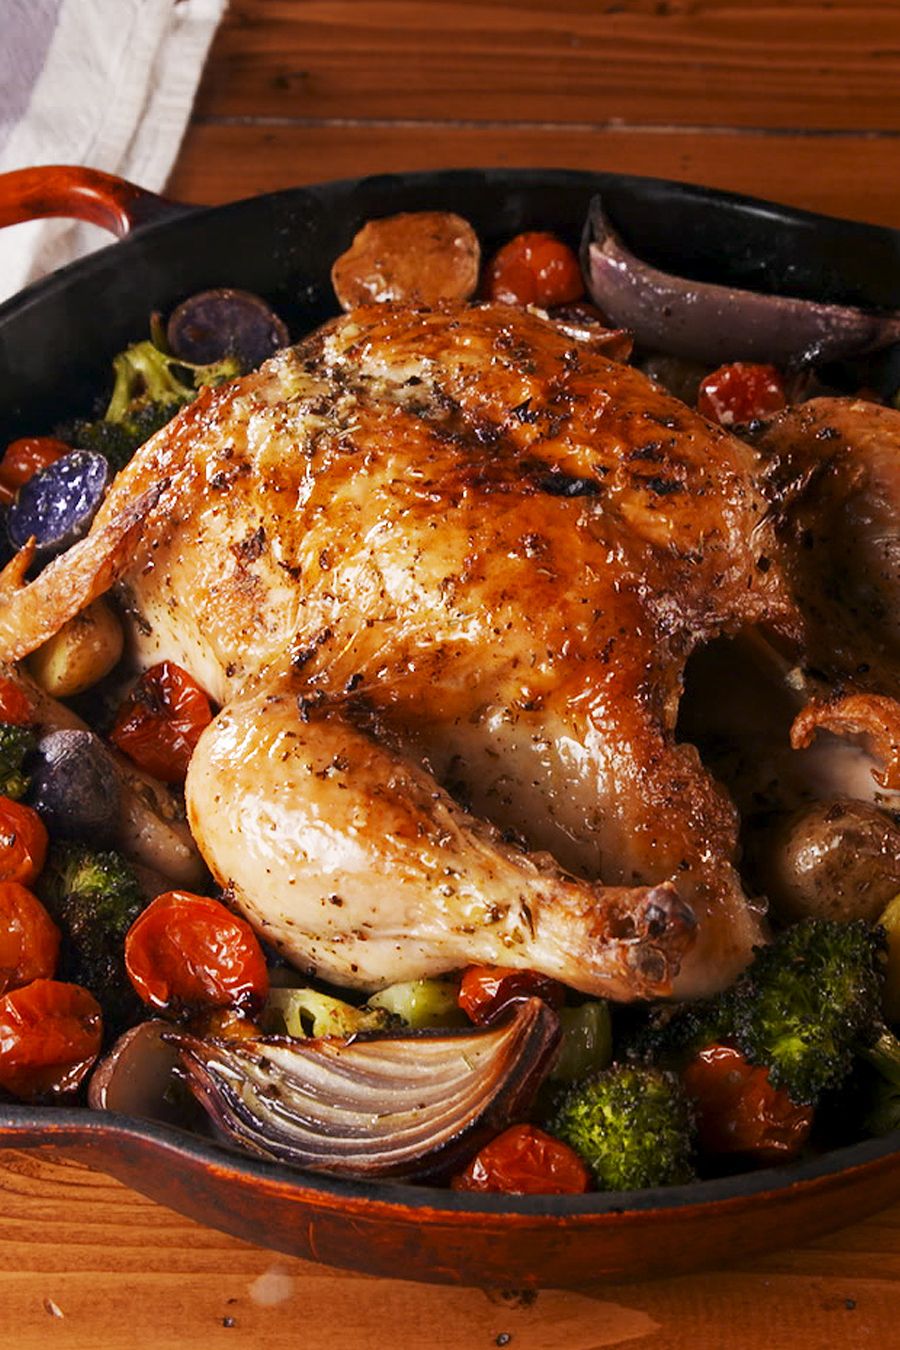 https://hips.hearstapps.com/hmg-prod/images/delish-tuscan-butter-roast-chicken-pin-1549636520.jpg?crop=1xw:0.9453781512605042xh;center,top&resize=980:*